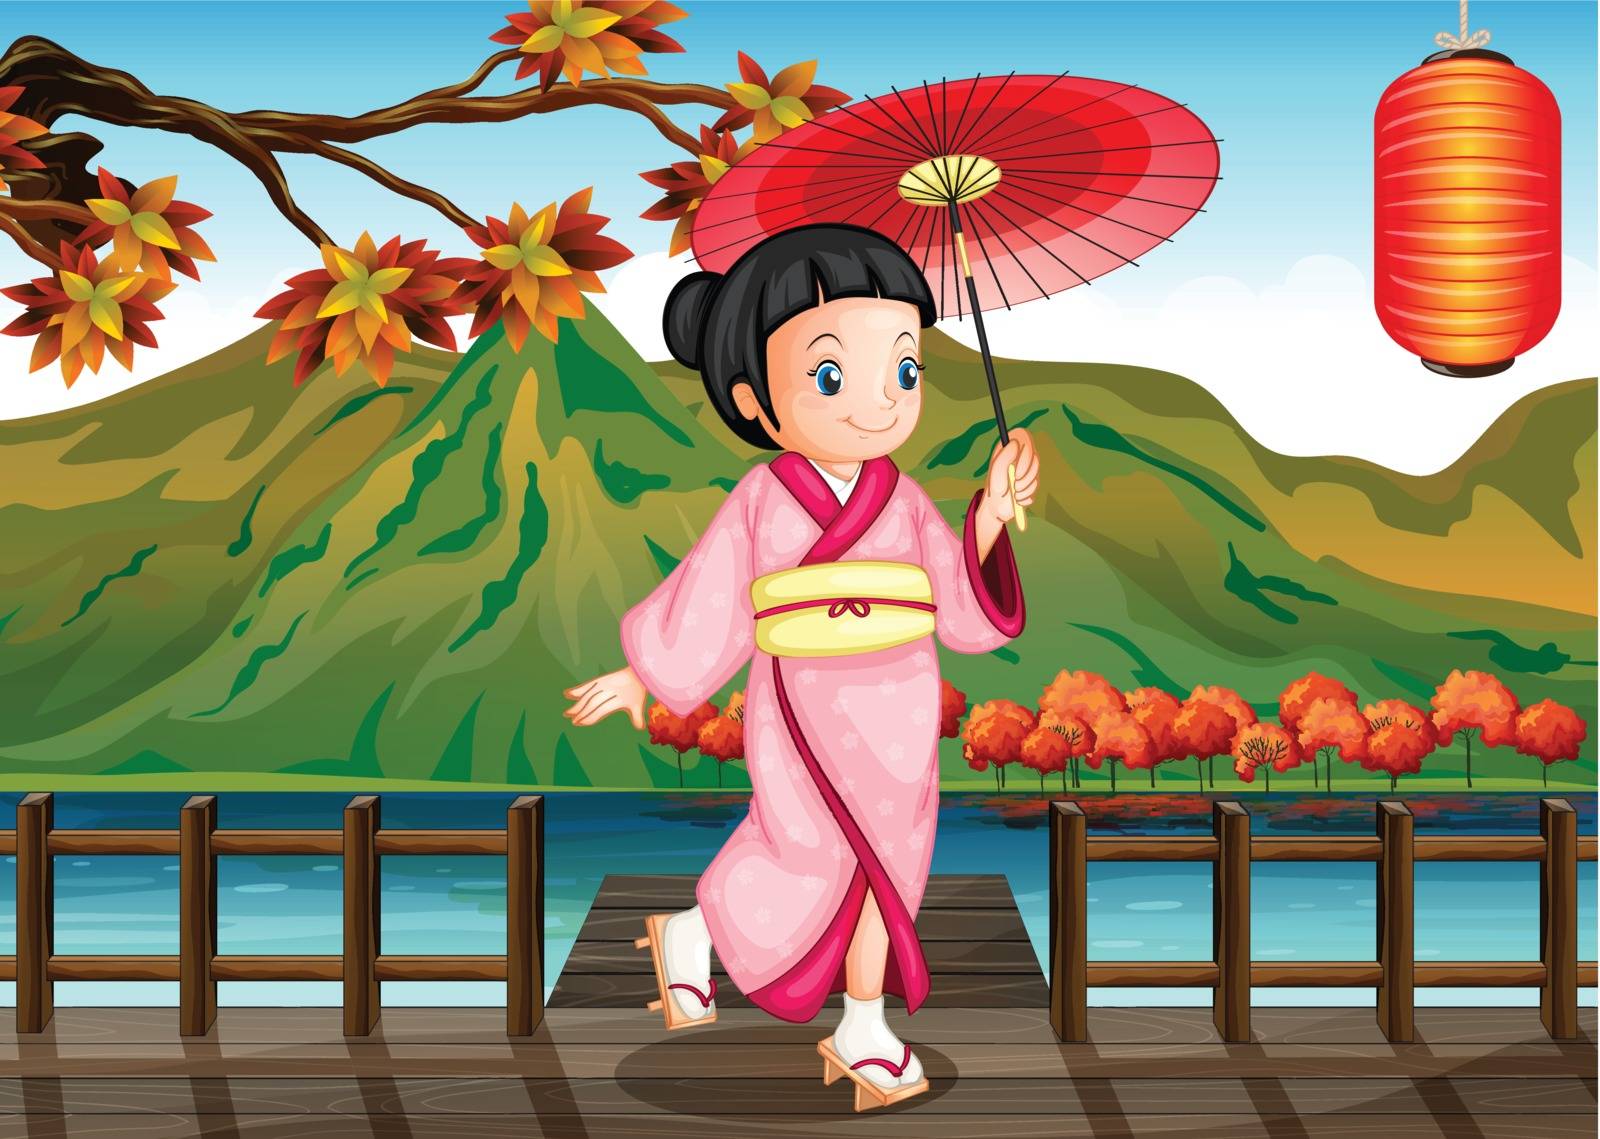 Illustration of a lady wearing a pink kimono with an umbrella